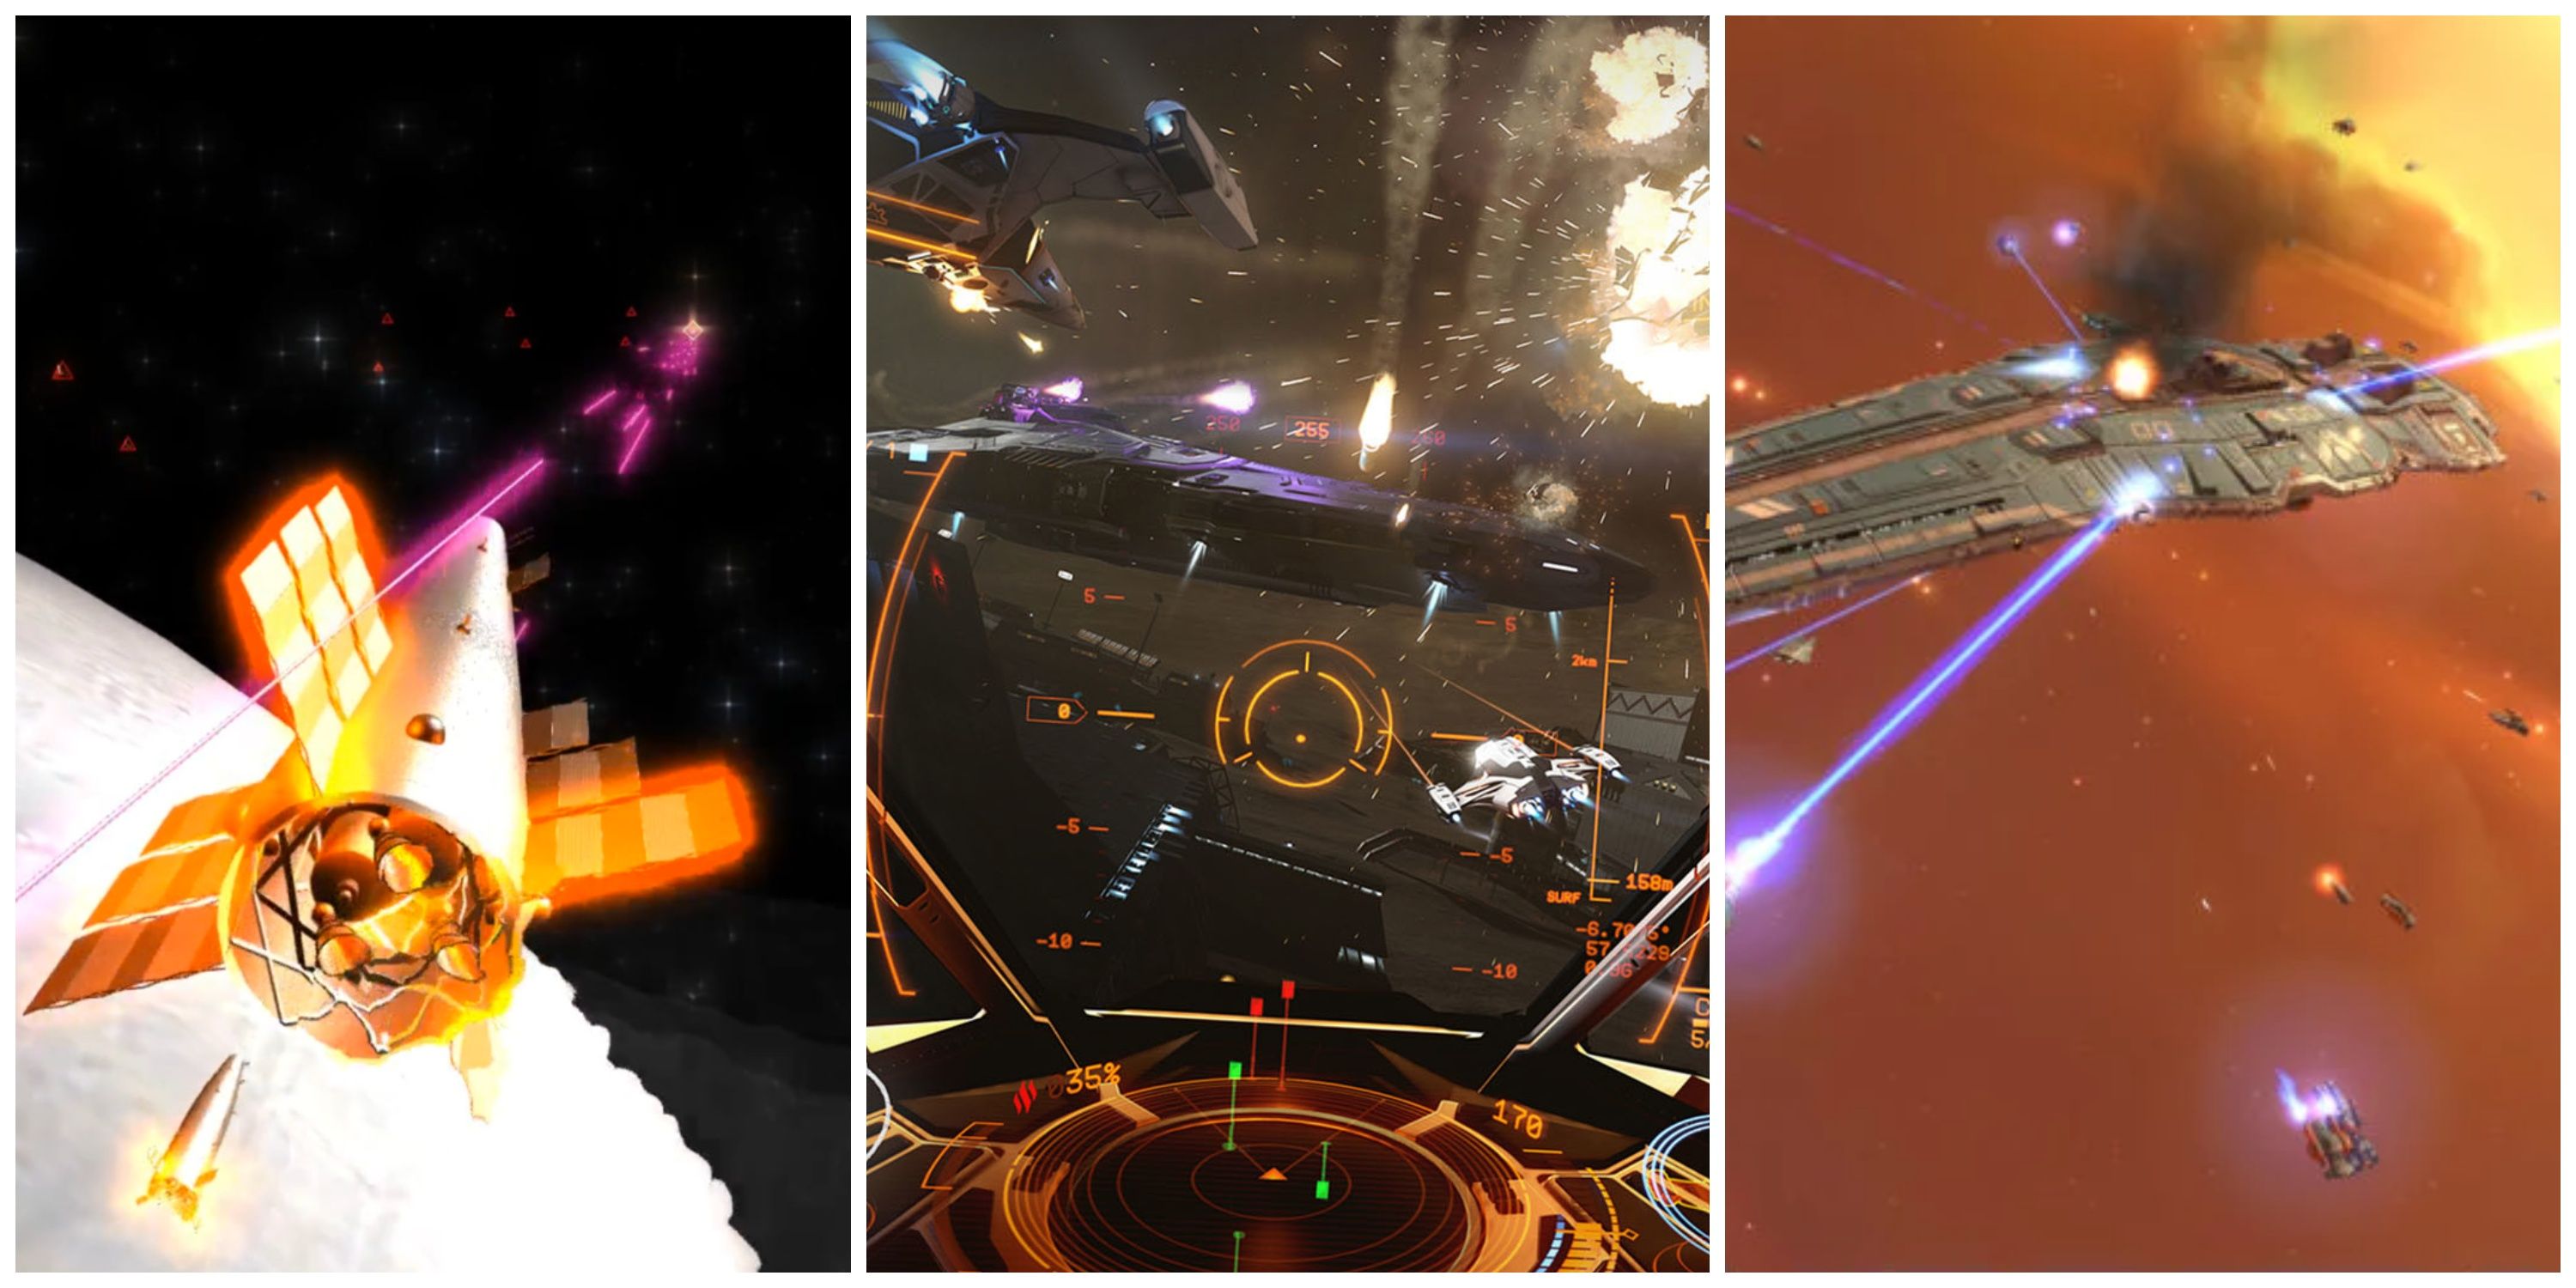 Sci-Fi Games With The Hardest Space Combat (Featured Image) - Children Of A Dead Earth + Elite Dangerous + Homeworld 2